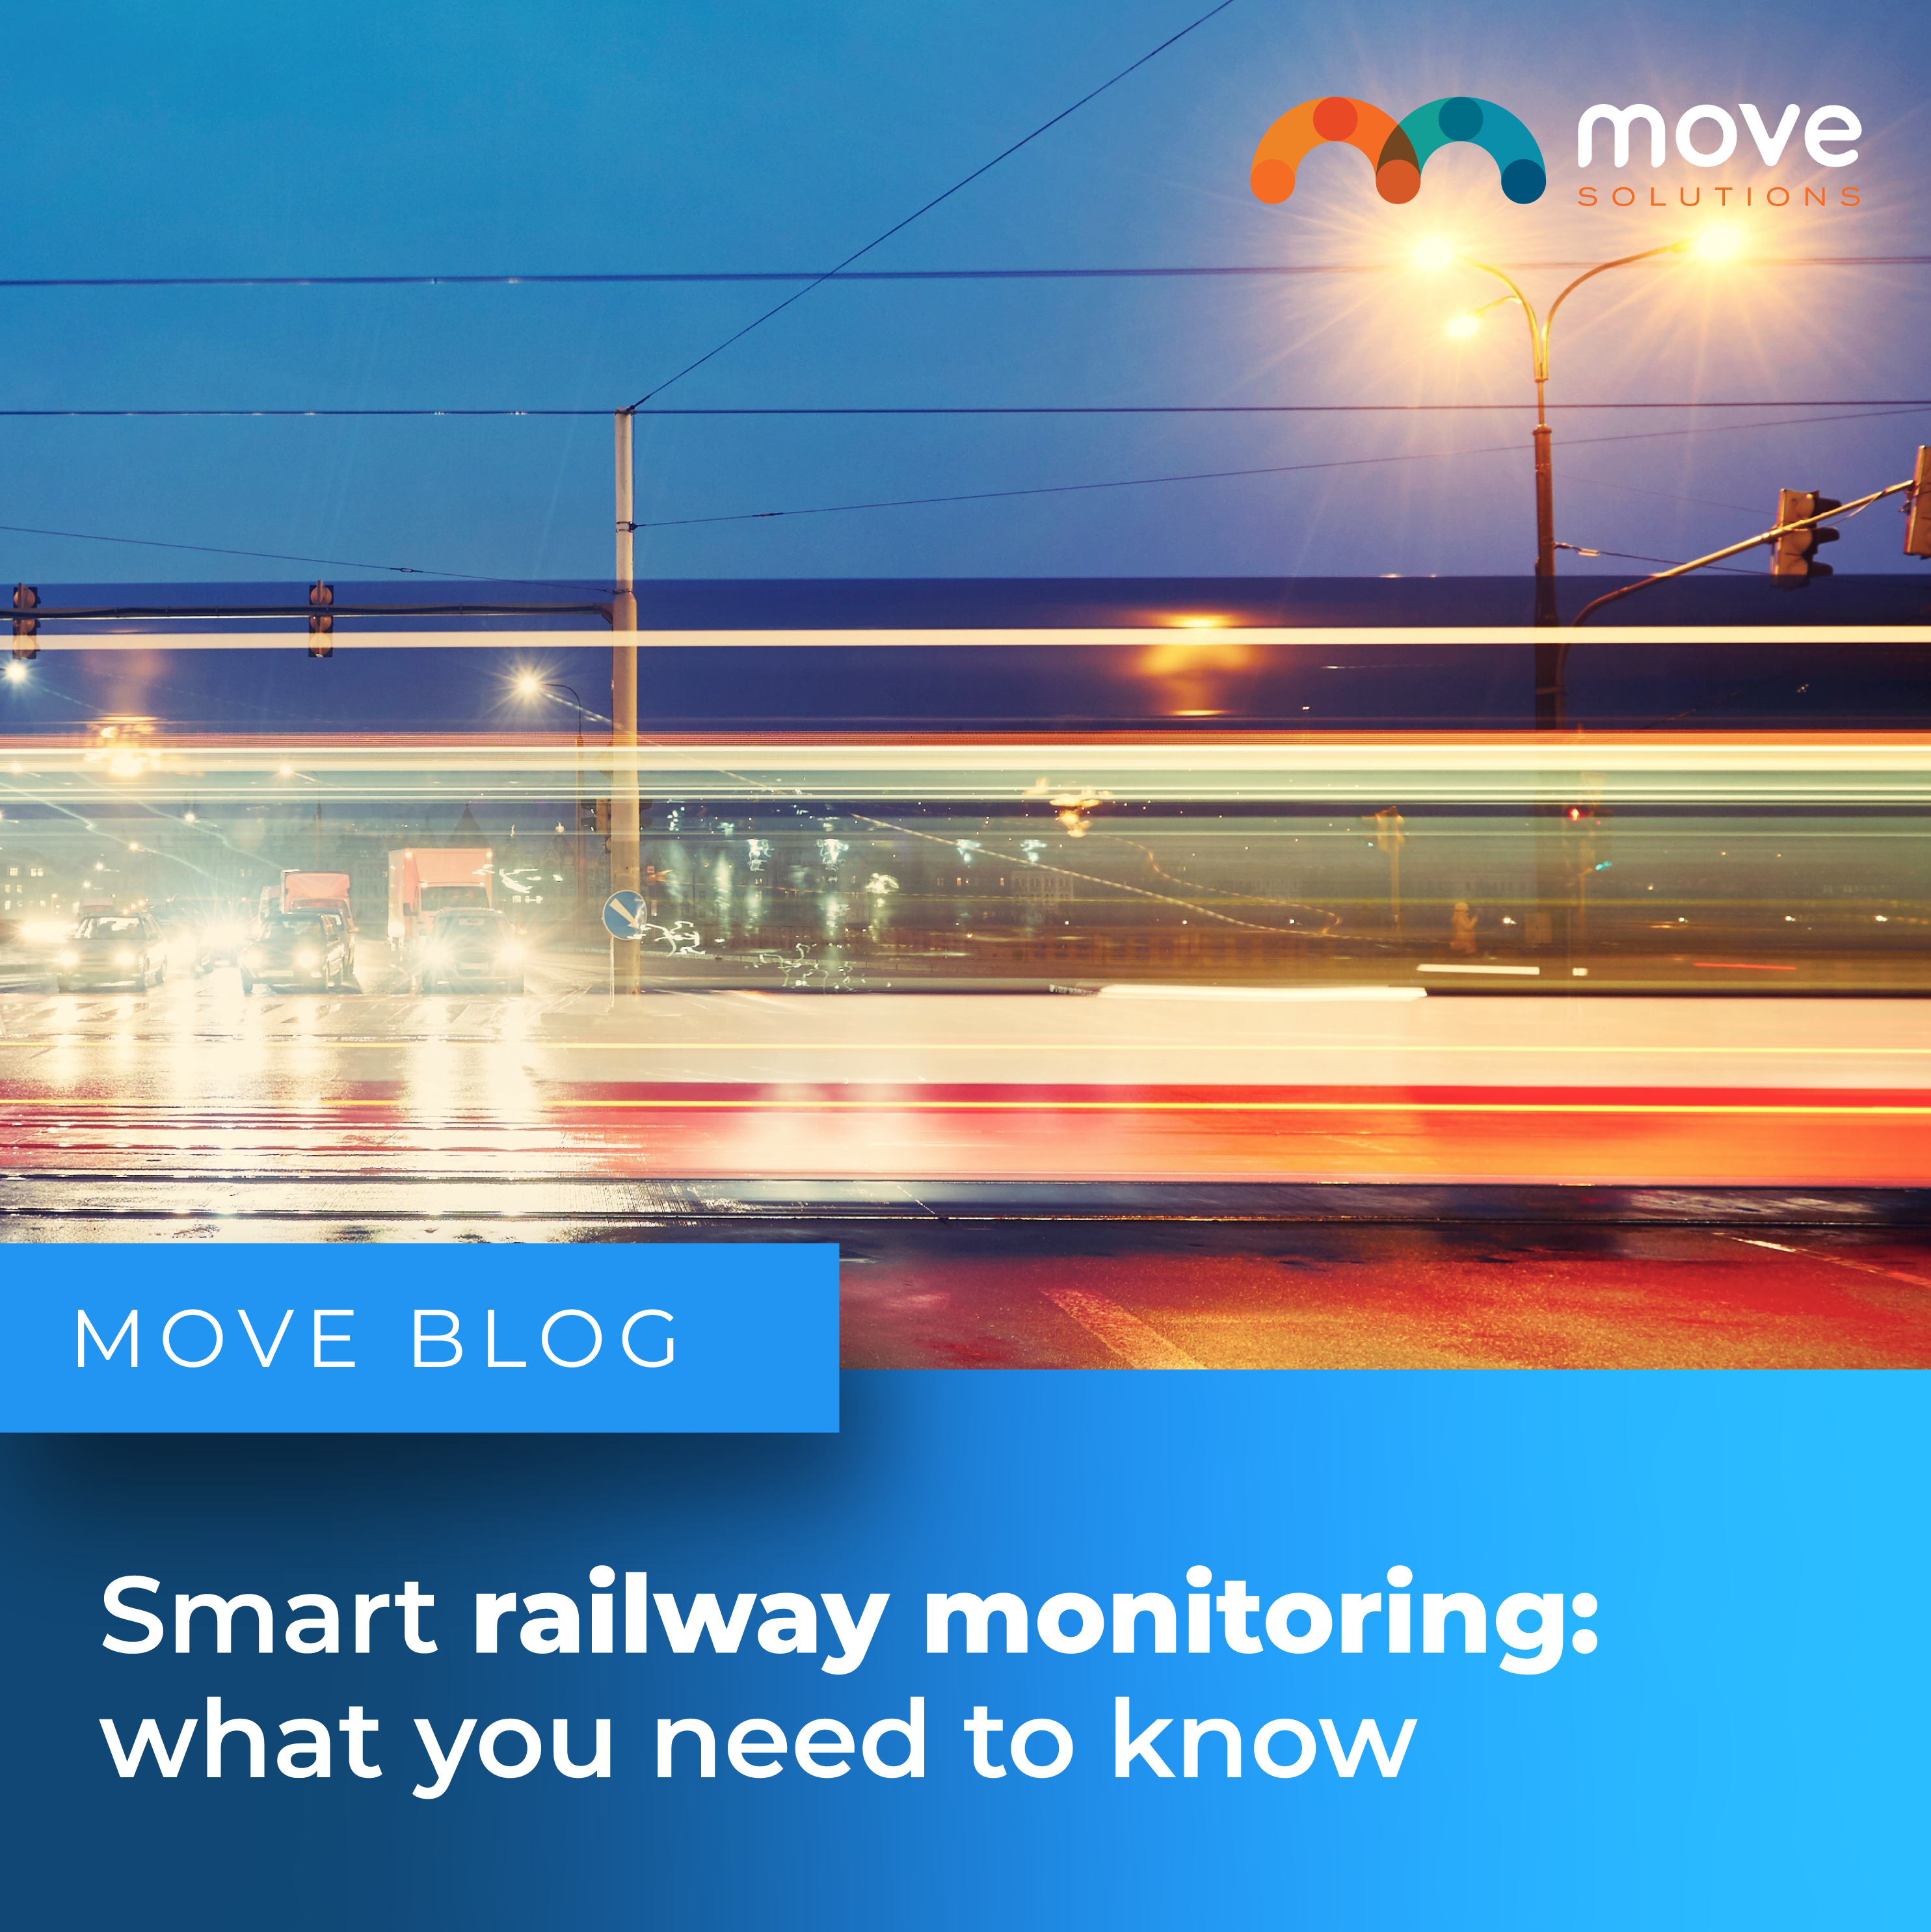 Smart railway monitoring: what you need to know